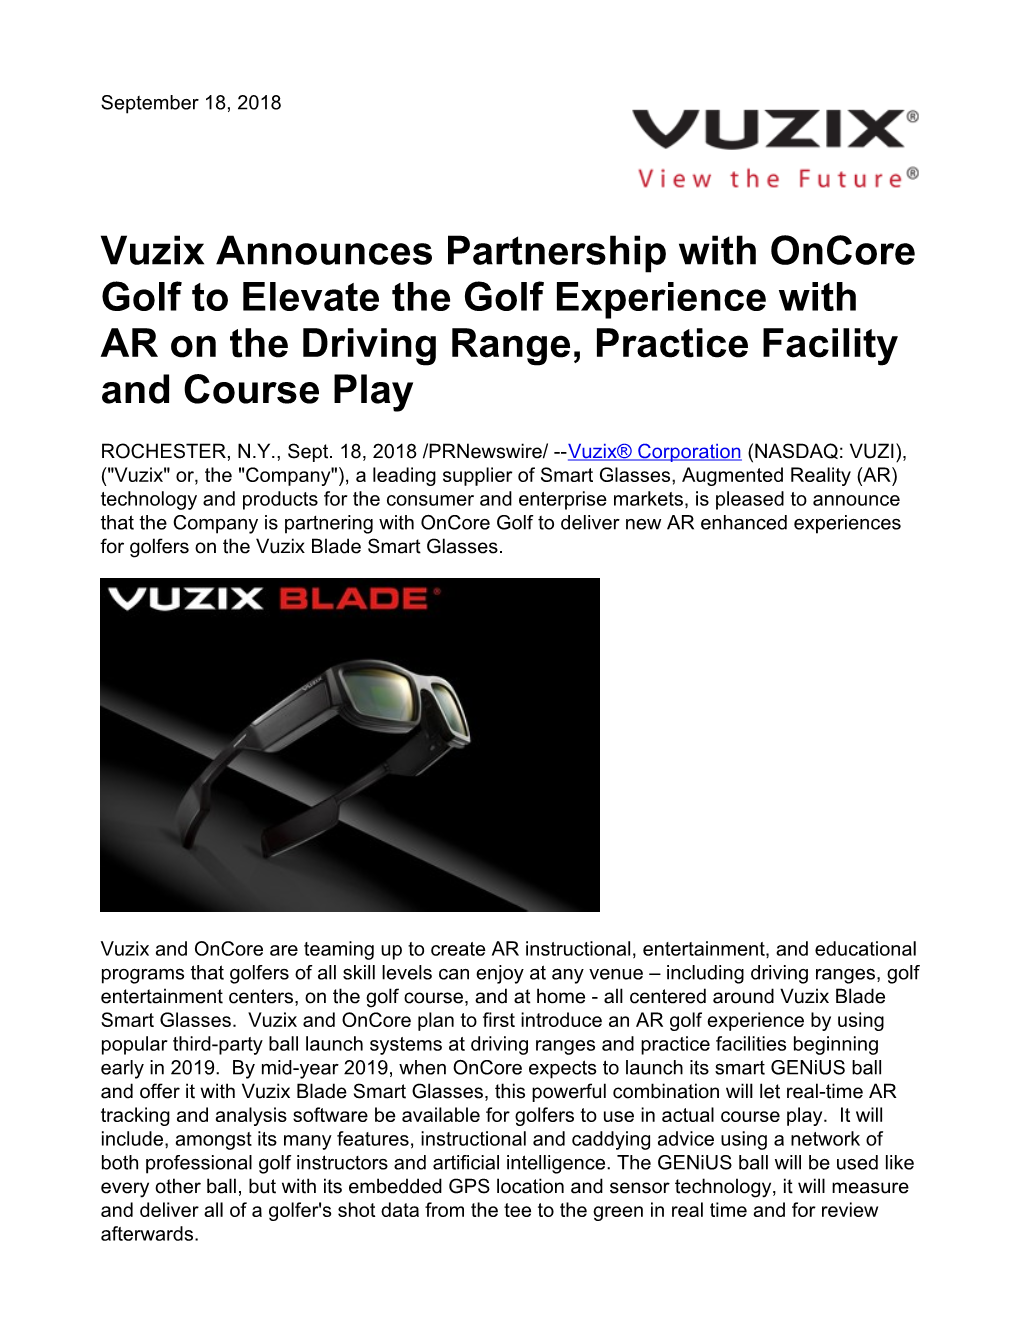 Vuzix Announces Partnership with Oncore Golf to Elevate the Golf Experience with AR on the Driving Range, Practice Facility and Course Play